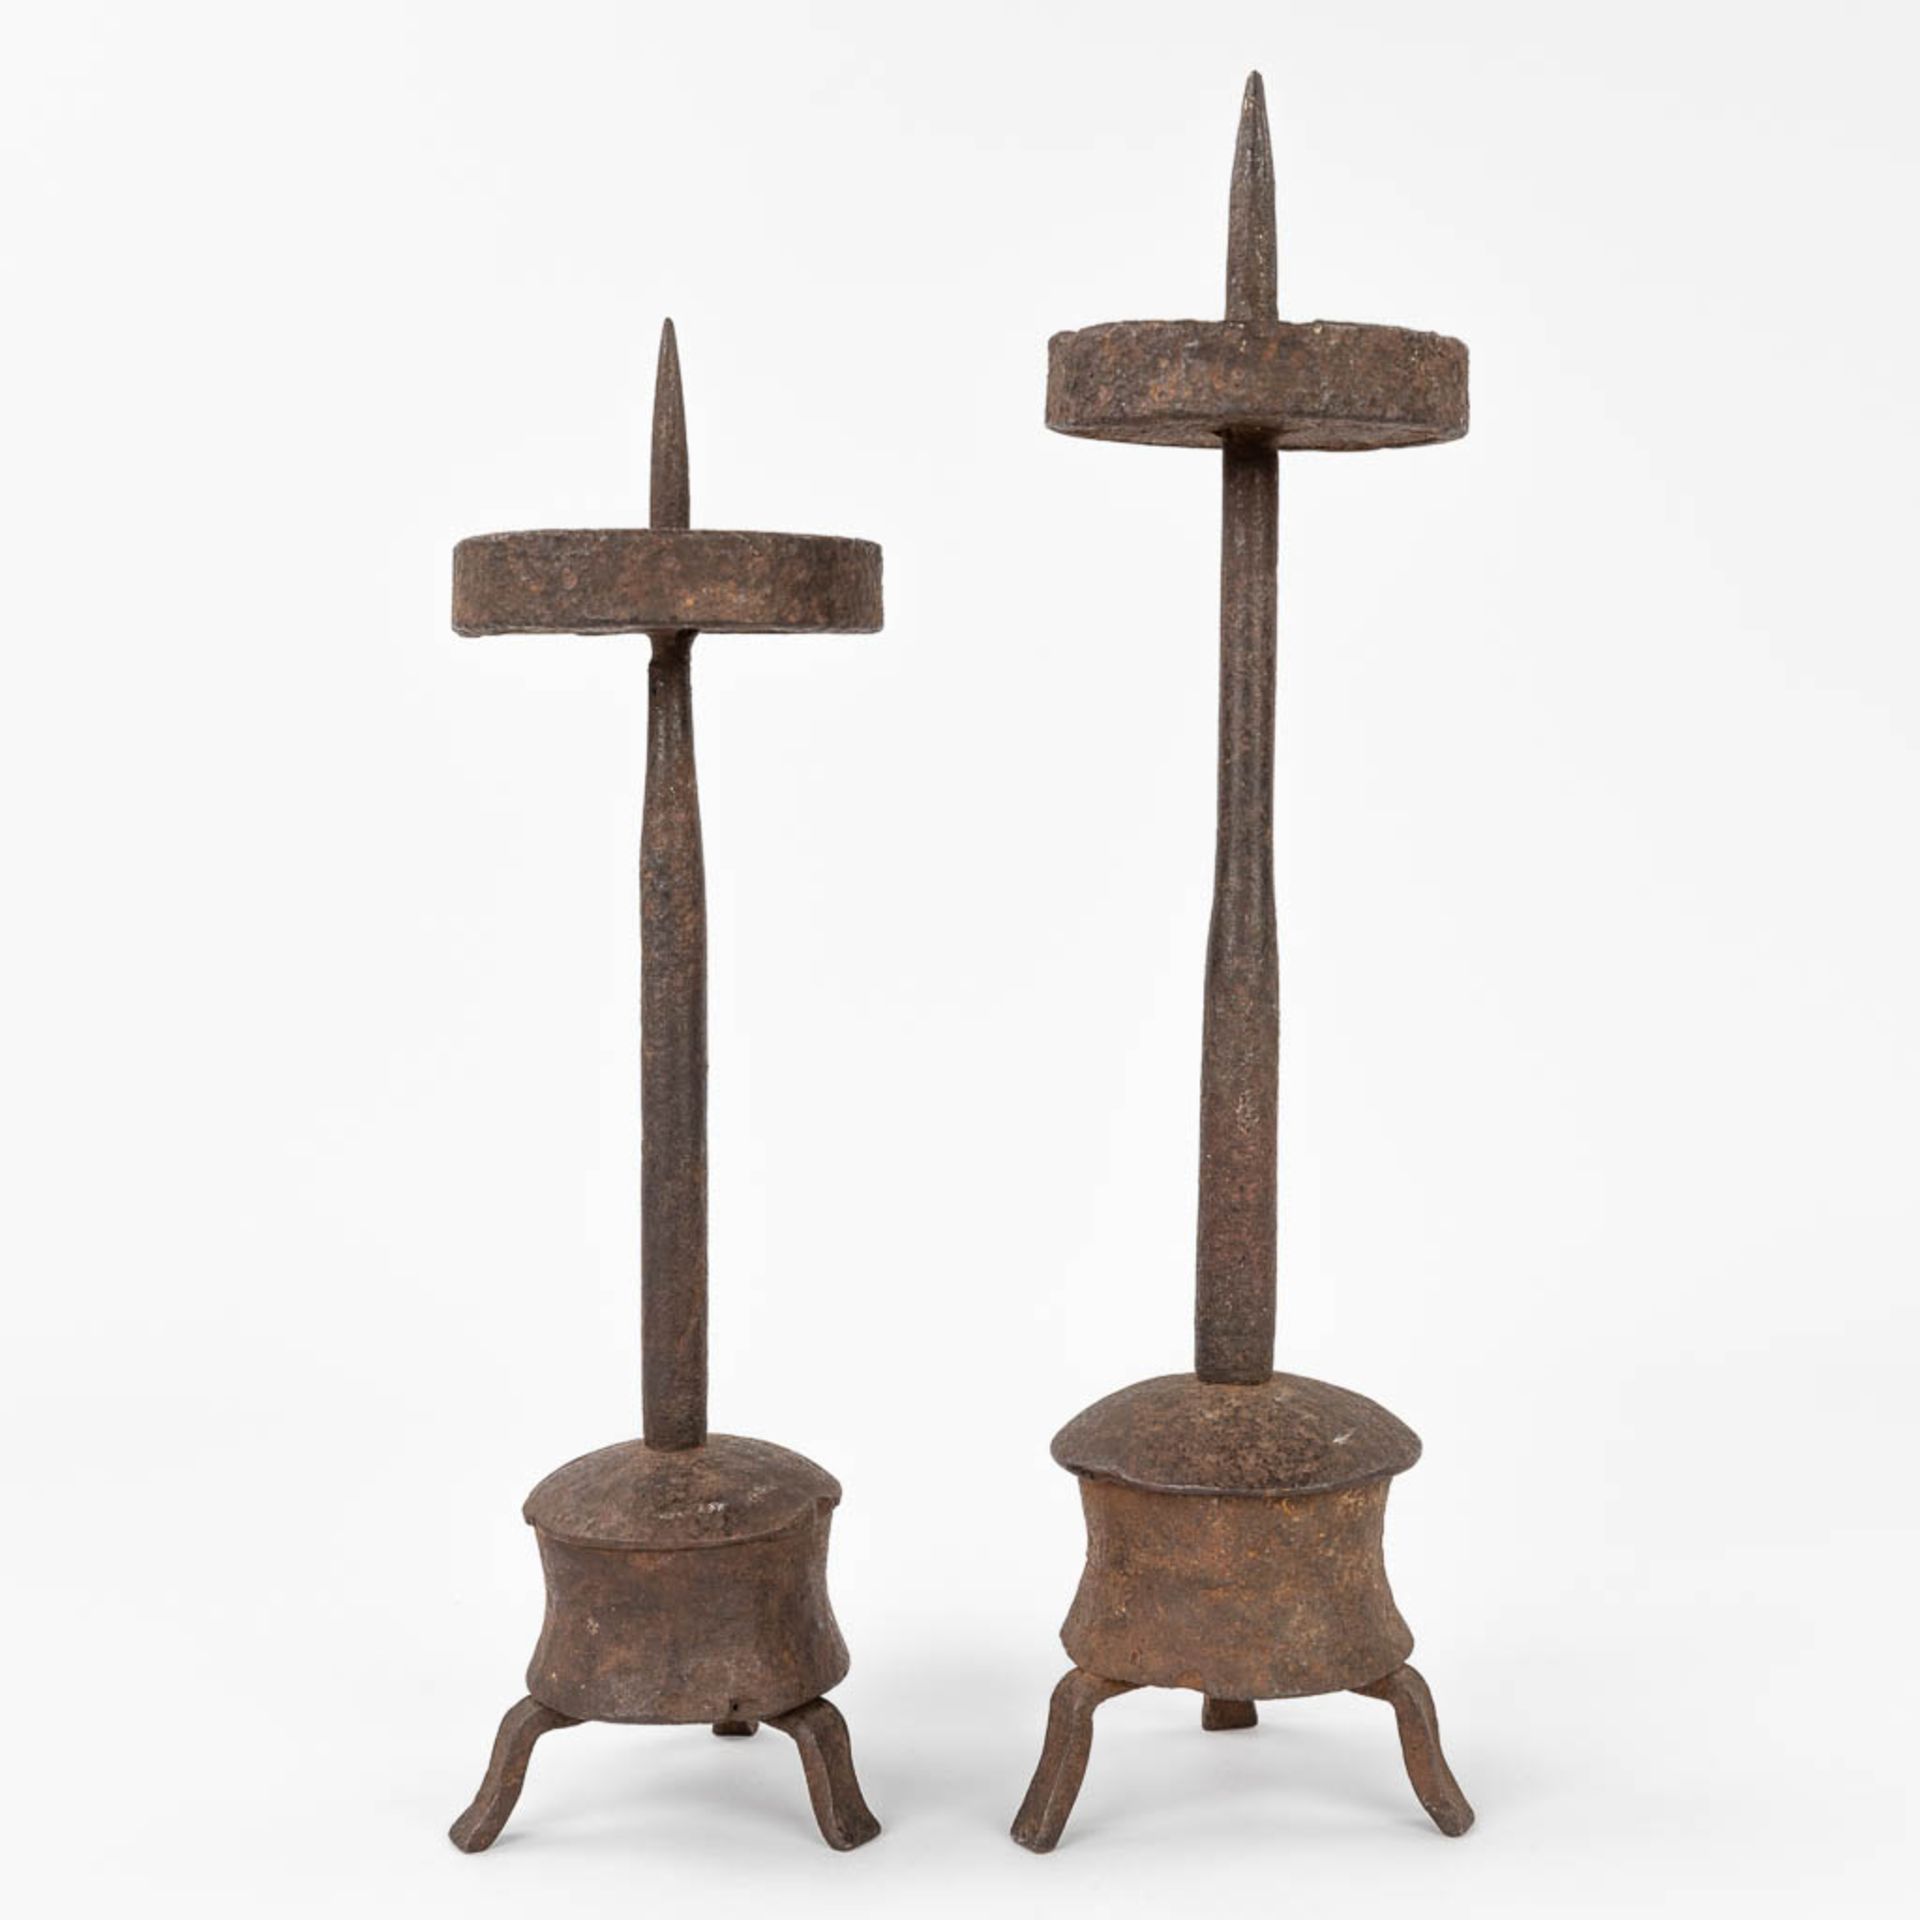 A pair of antique candlesticks made of wrought iron. Probably made in Southern Europe. (H:34 cm) - Image 3 of 16